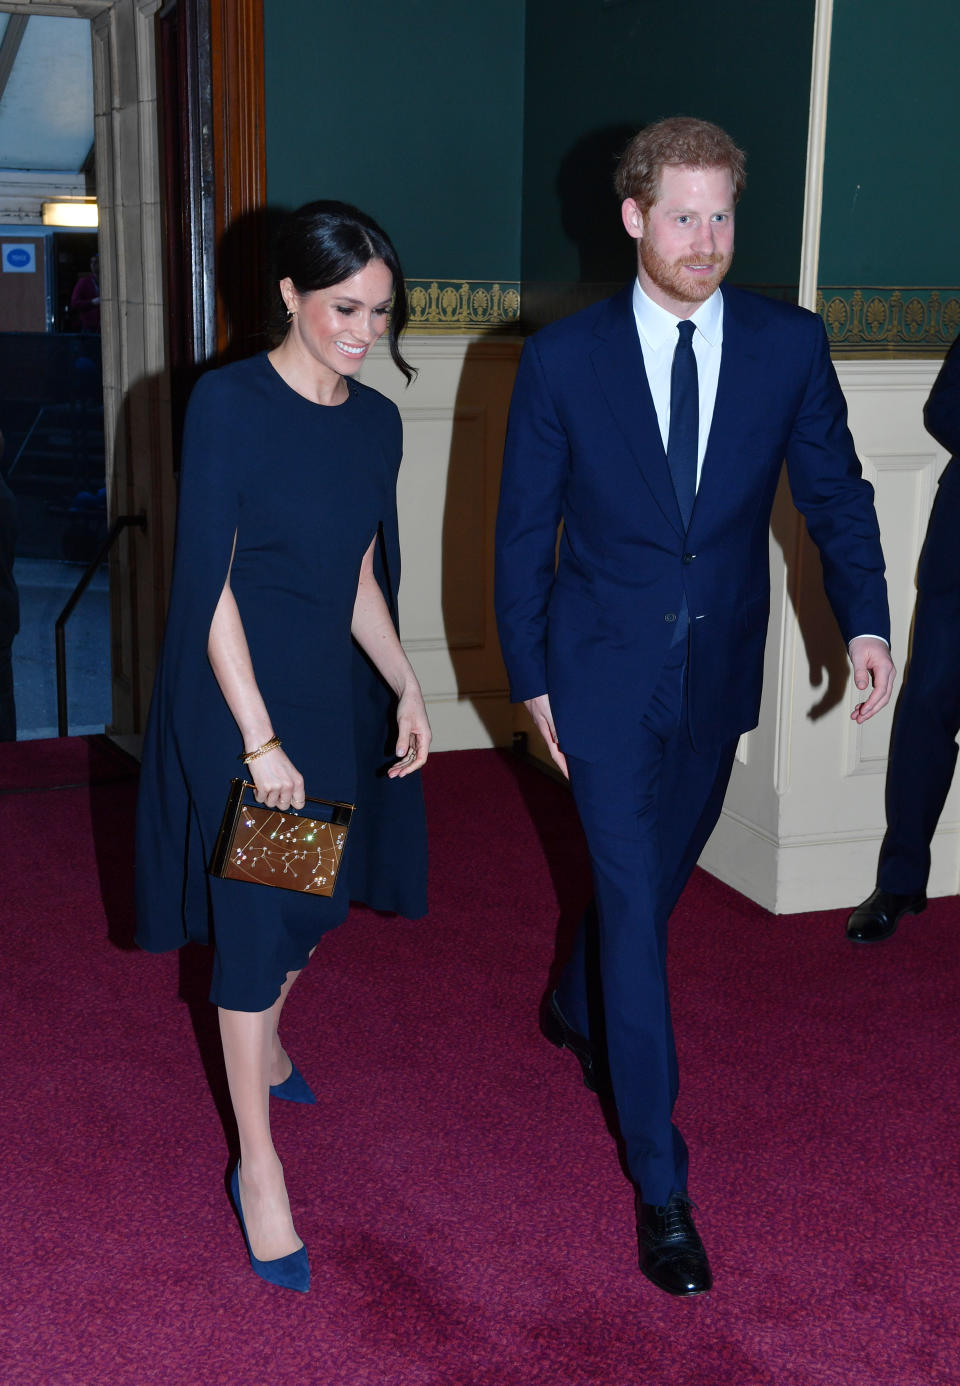 Prince Harry and Meghan Markle arrive at the Royal Albert Hall to attend a star-studded concert to celebrate the Queen's 92nd birthday on April 21, 2018 in London, England.  The Queen and members of the royal family are guests of honour at the celebration, which is being billed as The Queen's Birthday Party. (Photo by John Stillwell - WPA Pool/Getty Images)